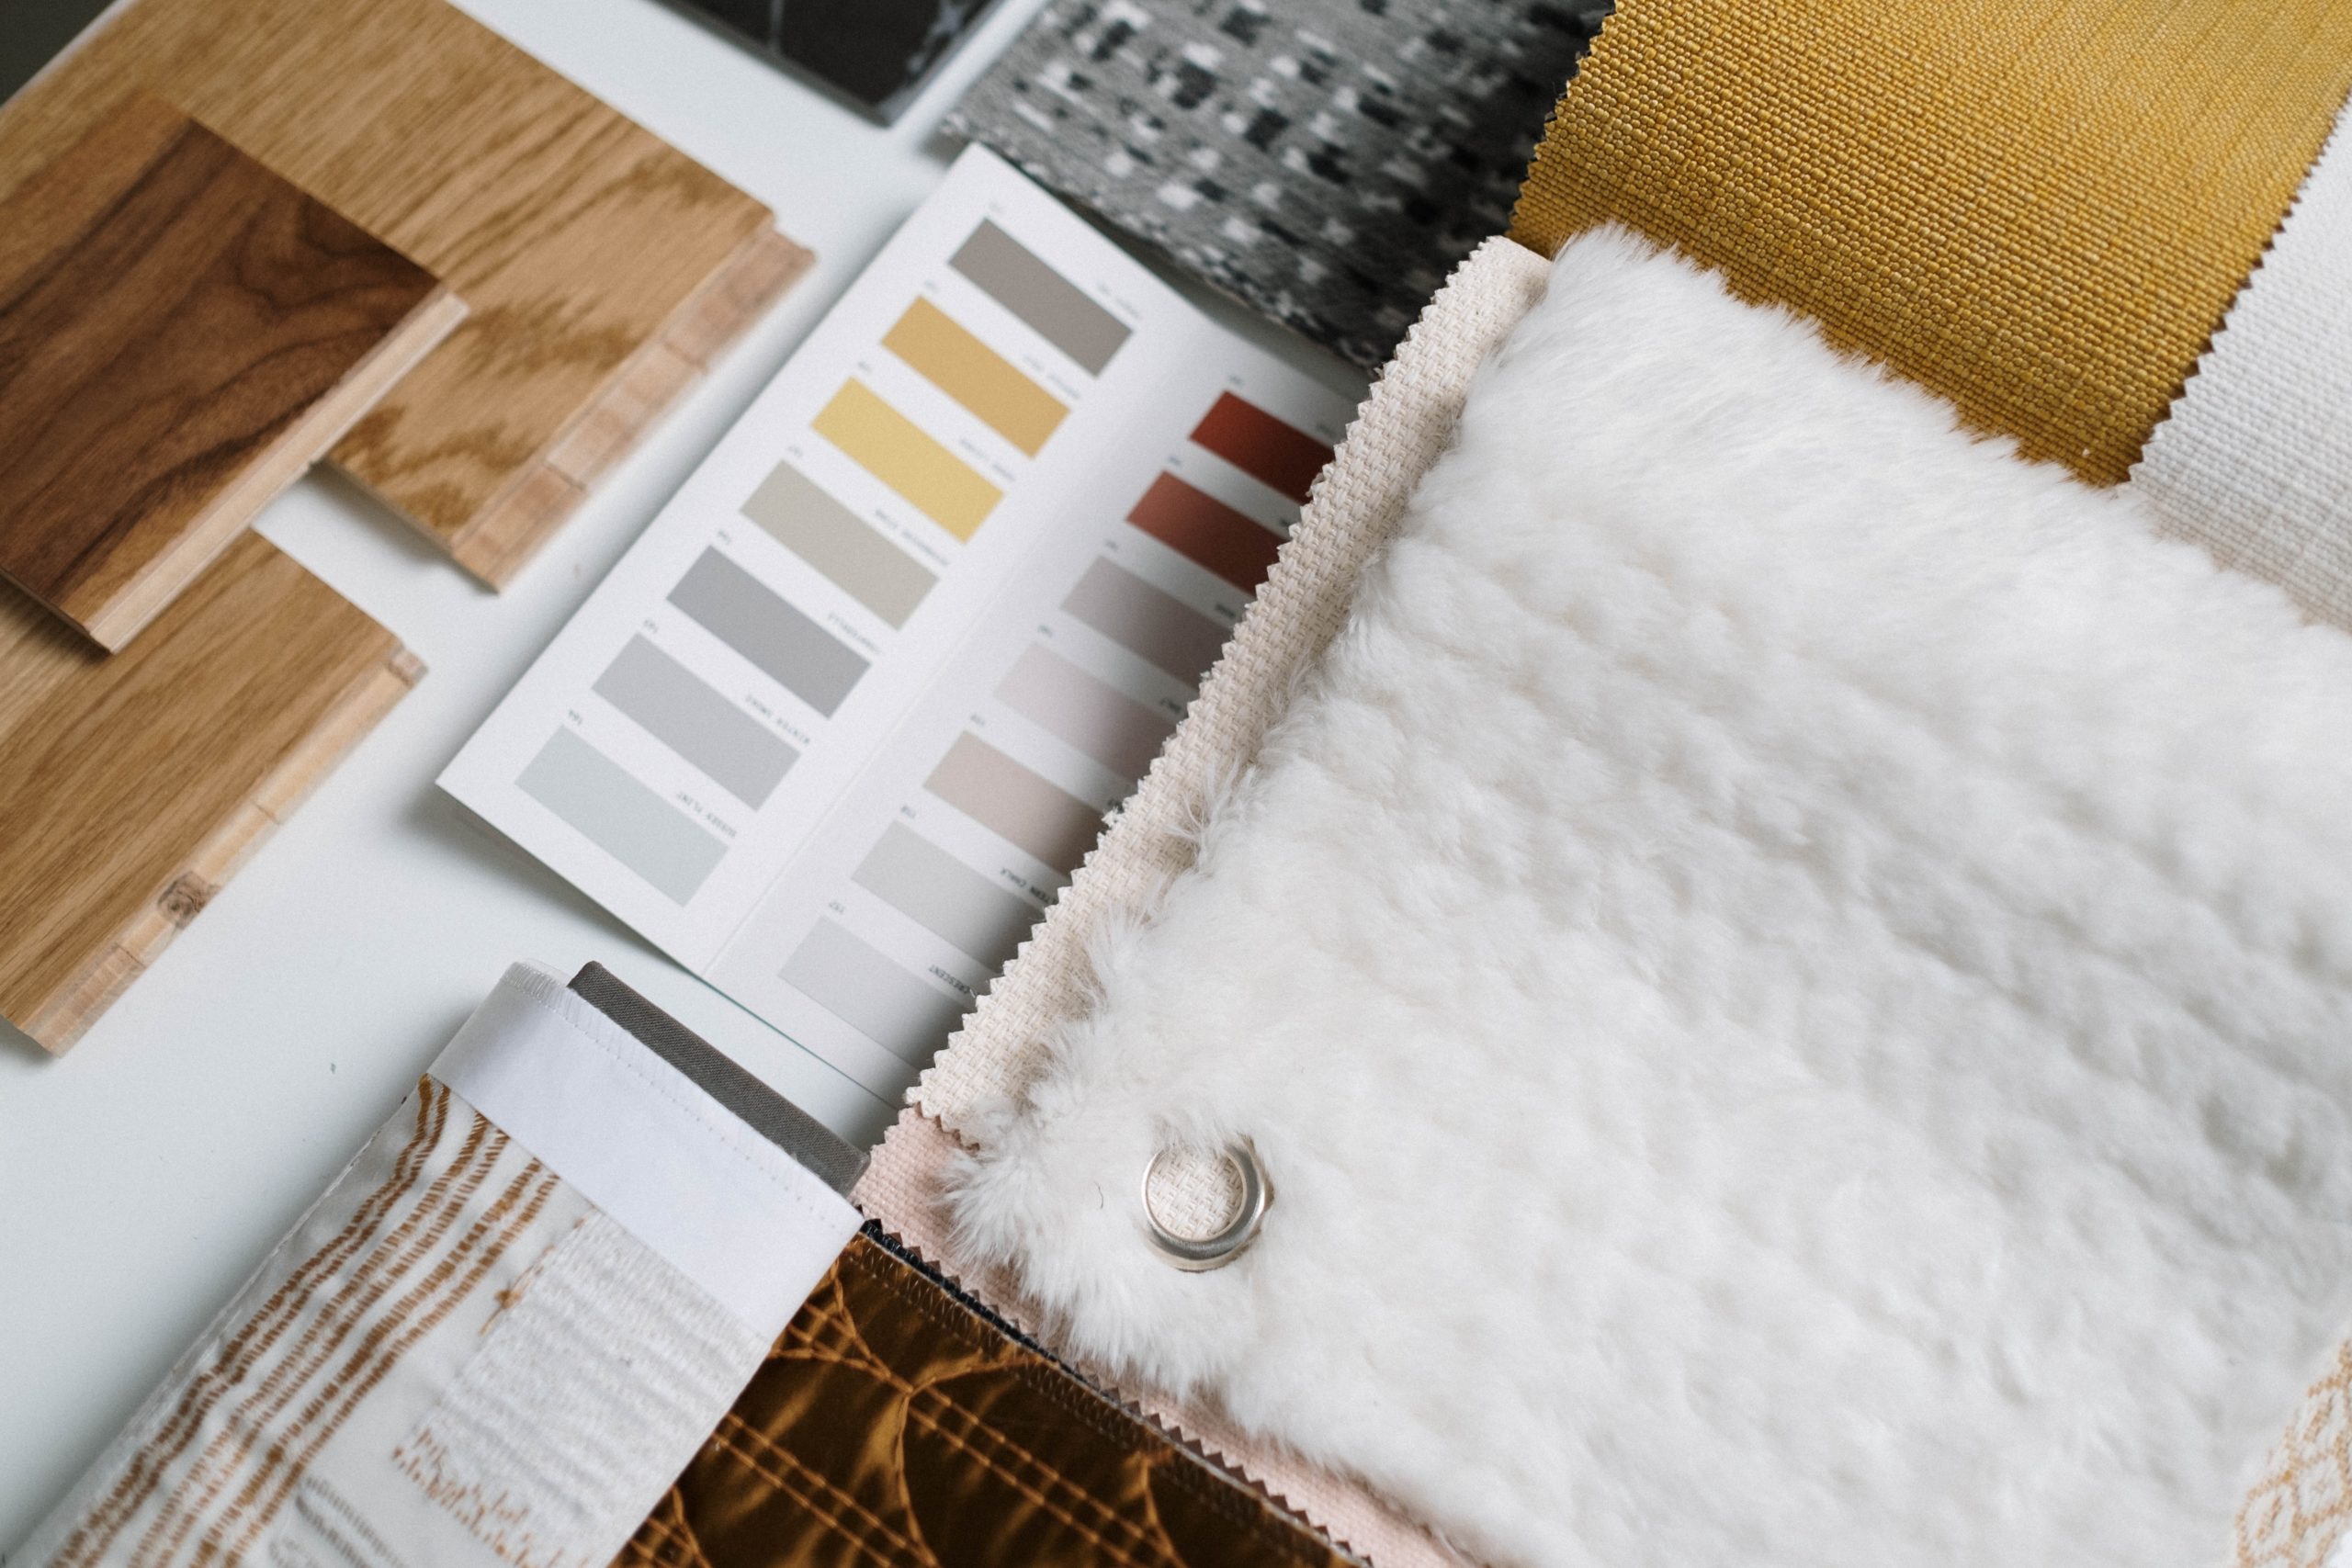 Fabric samples, wood samples, and paint samples for interior design